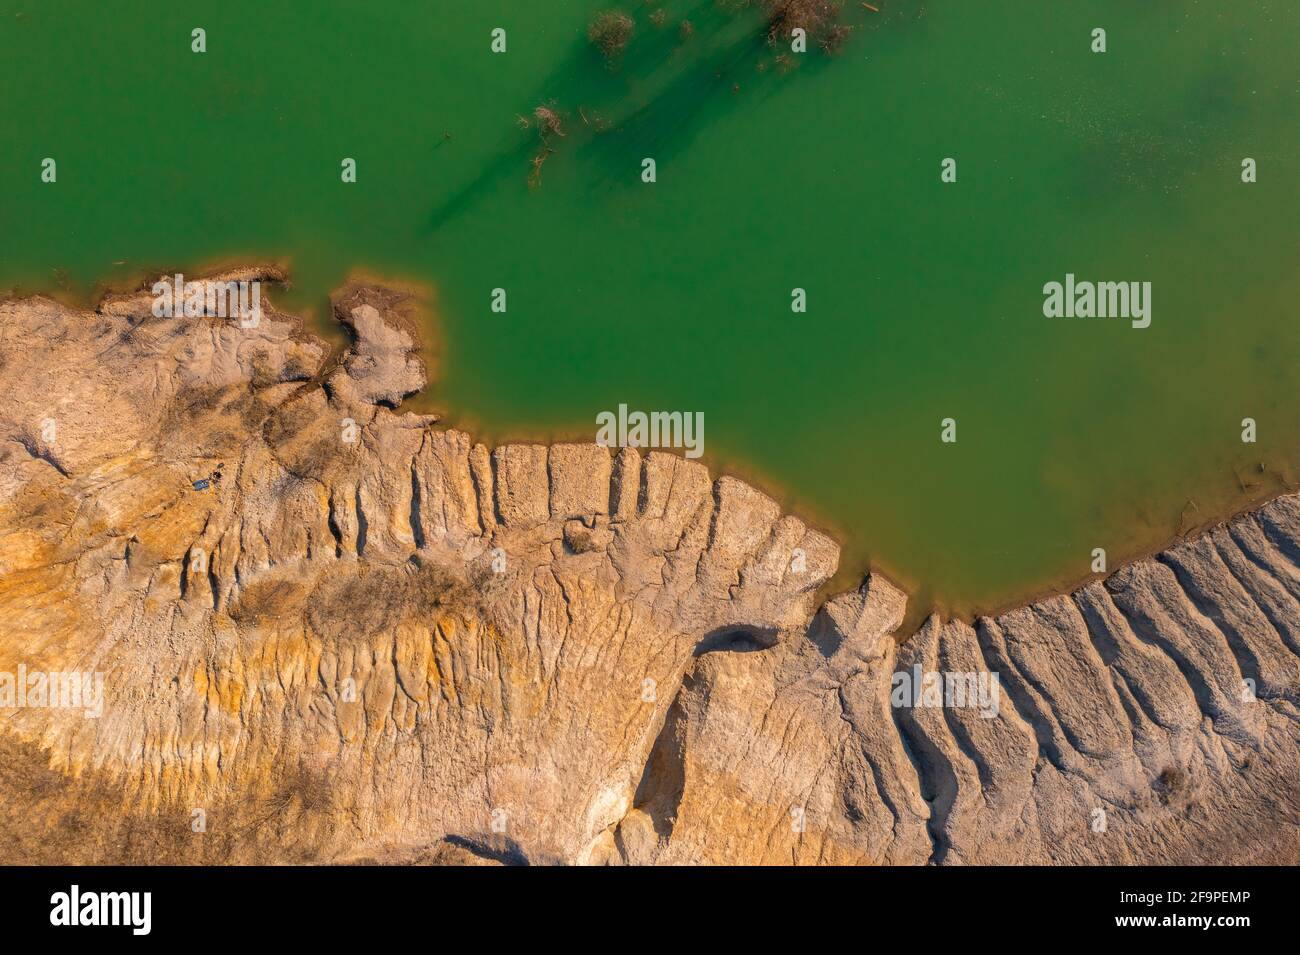 Solymár, Hungary - Aerial view about rocky seashore with green colored water. Stock Photo